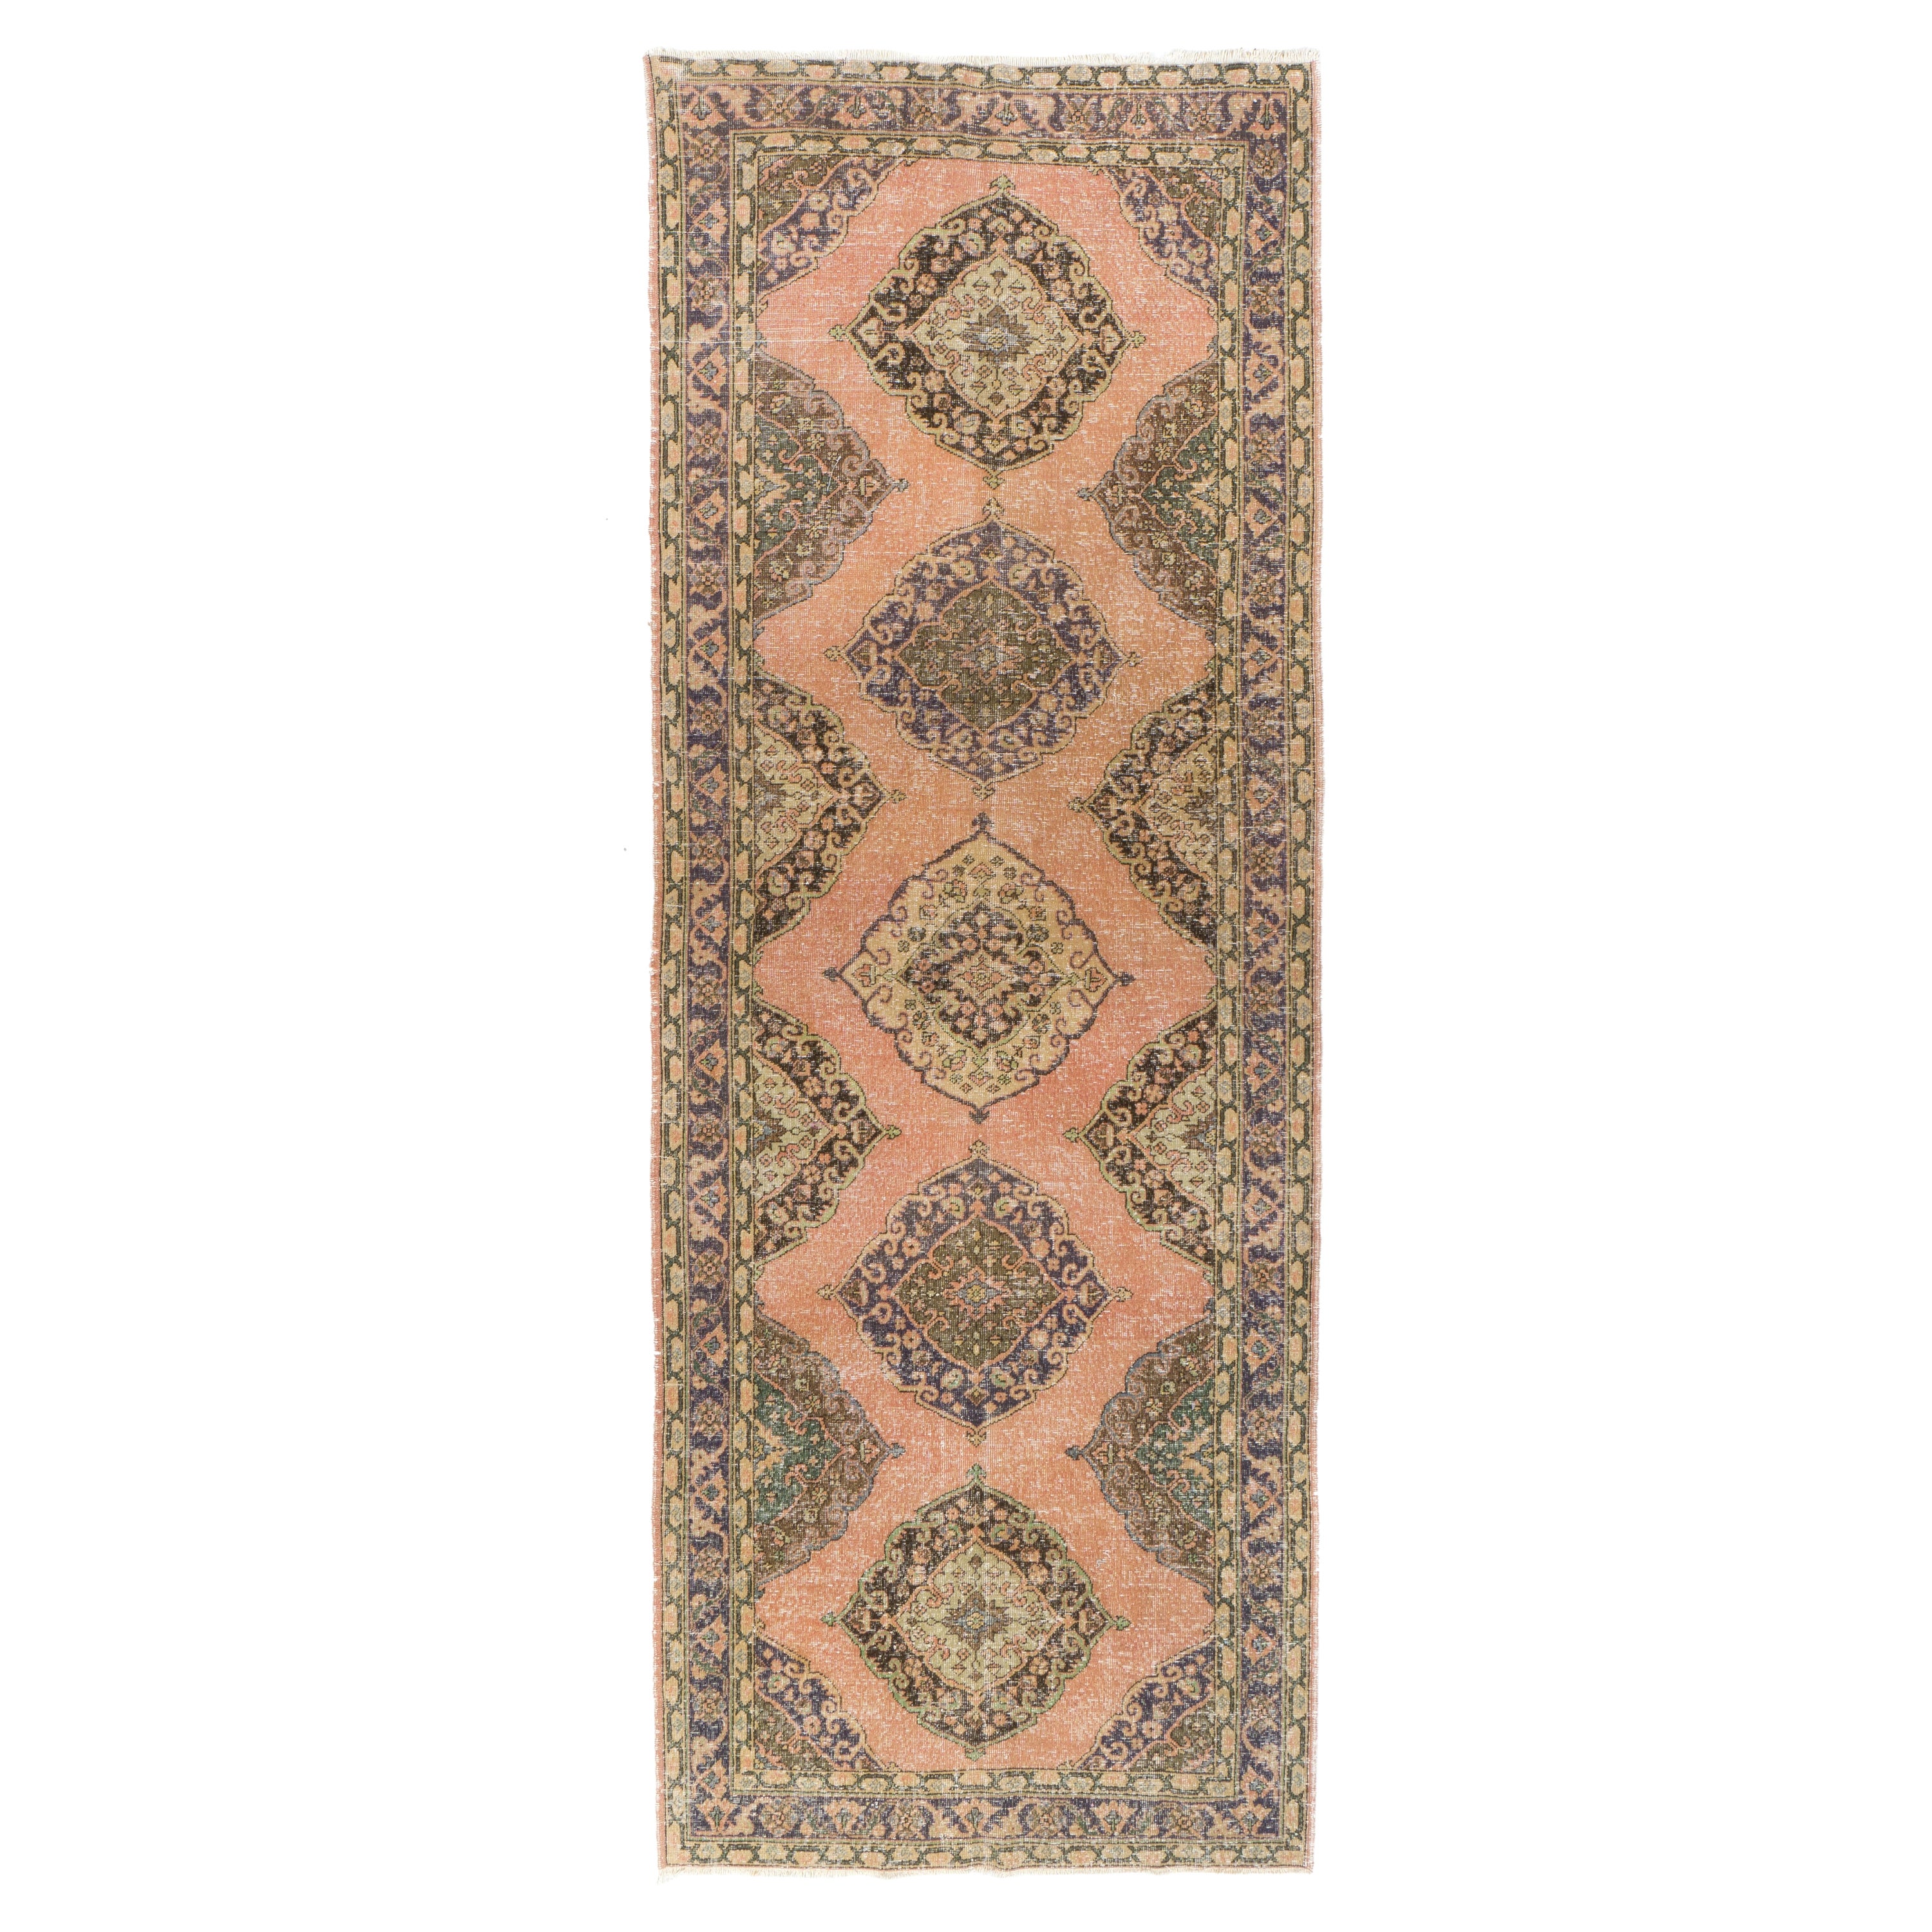 4.7x13.2 Ft Traditional Hand Knotted Runner Rug. Tapis de couloir vintage unique